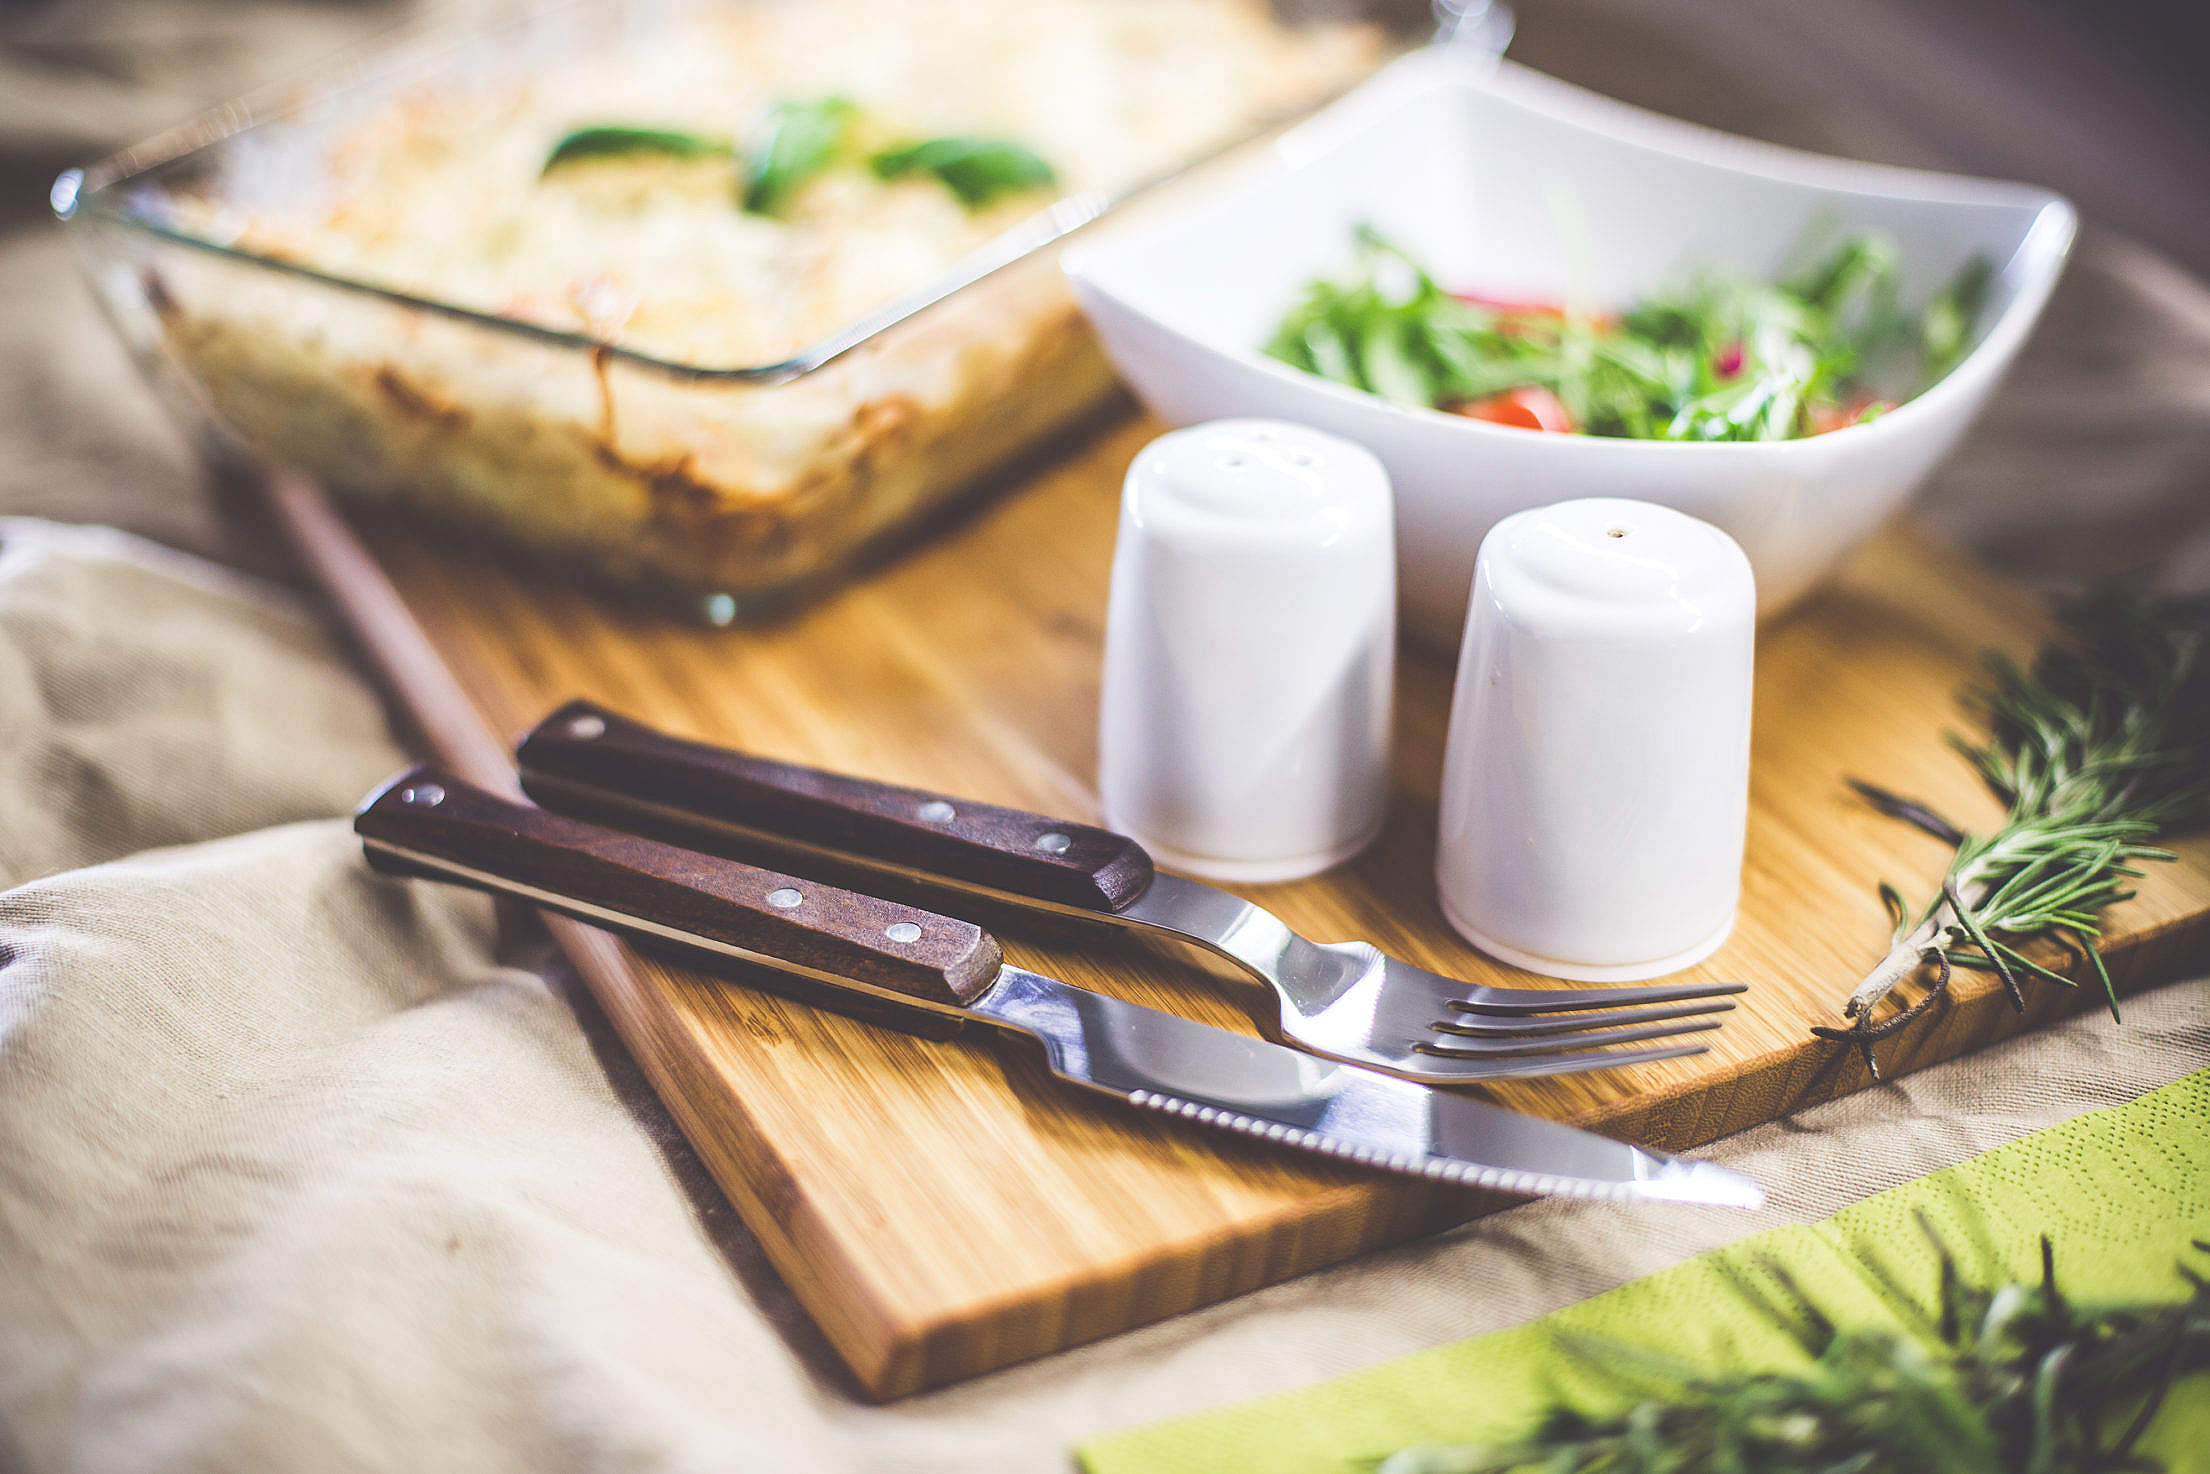 Knife and Fork, Salt and Pepper: Dinner is Ready Free Stock Photo